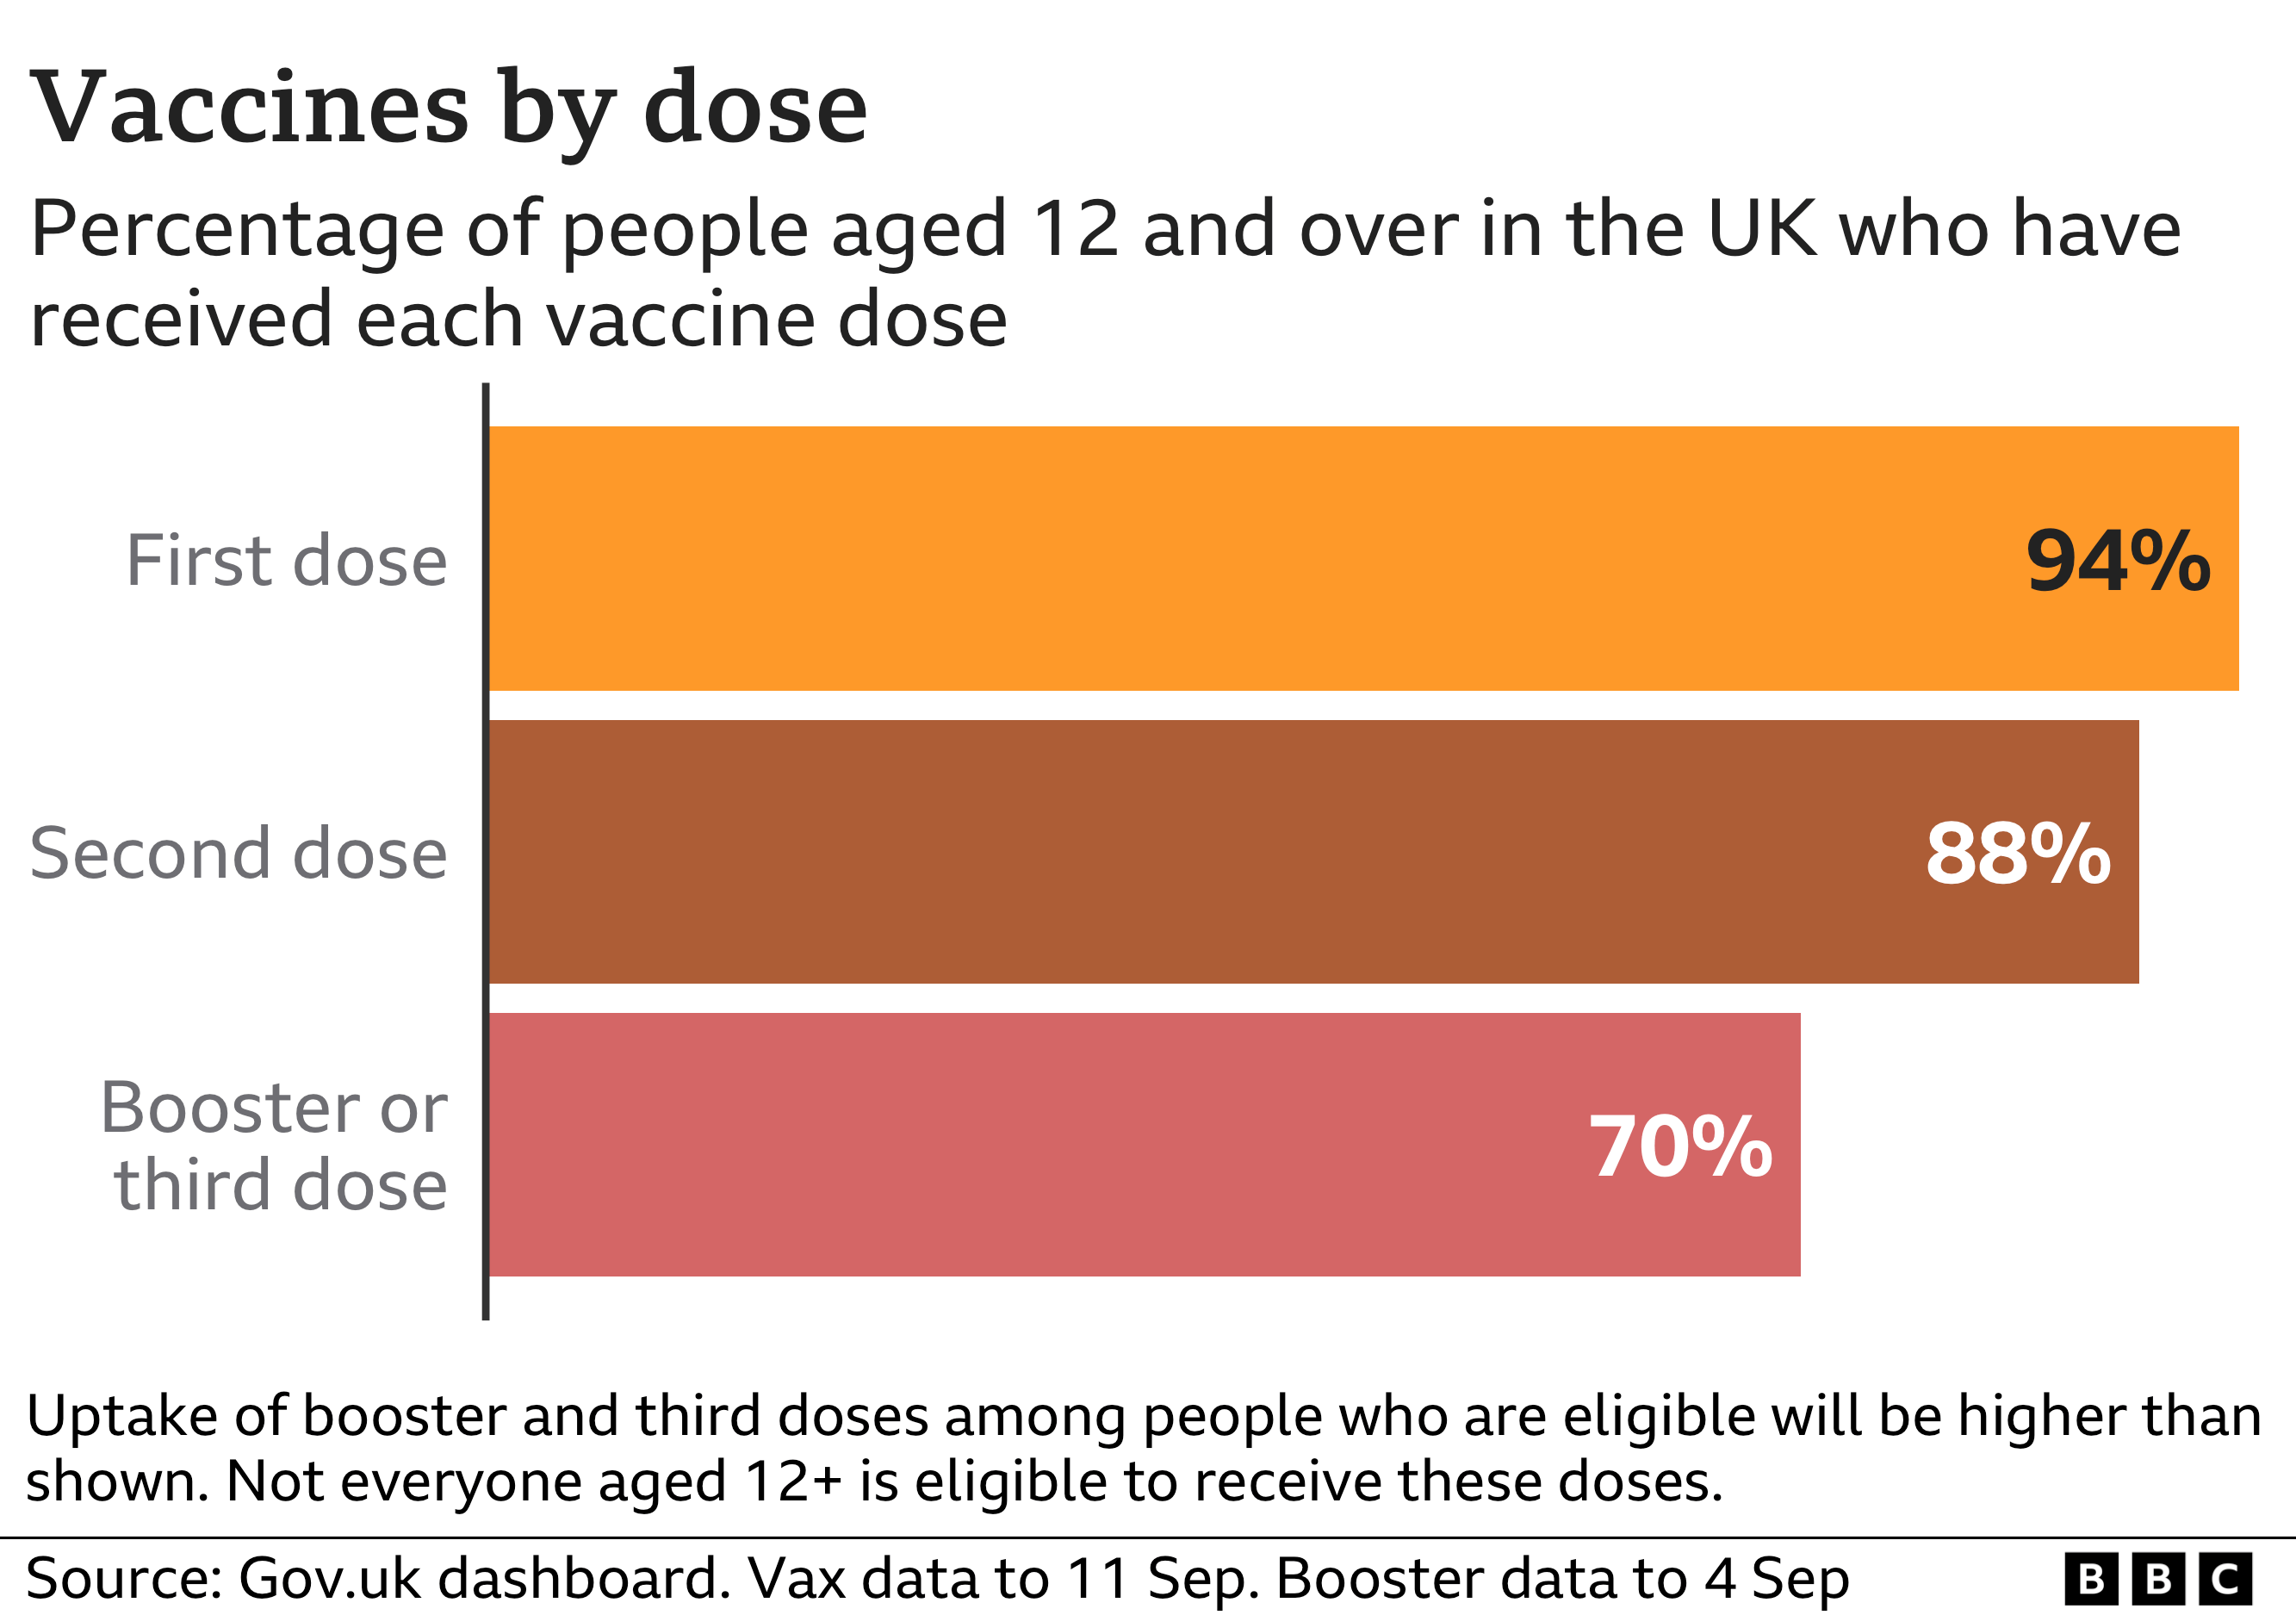 Graph showing the percentage of UK population vaccinated by dose.  First dose: 93.6.  Second dose: 88.3.  Booster dose: 70. Immunization data through September 11, booster data through September 4.